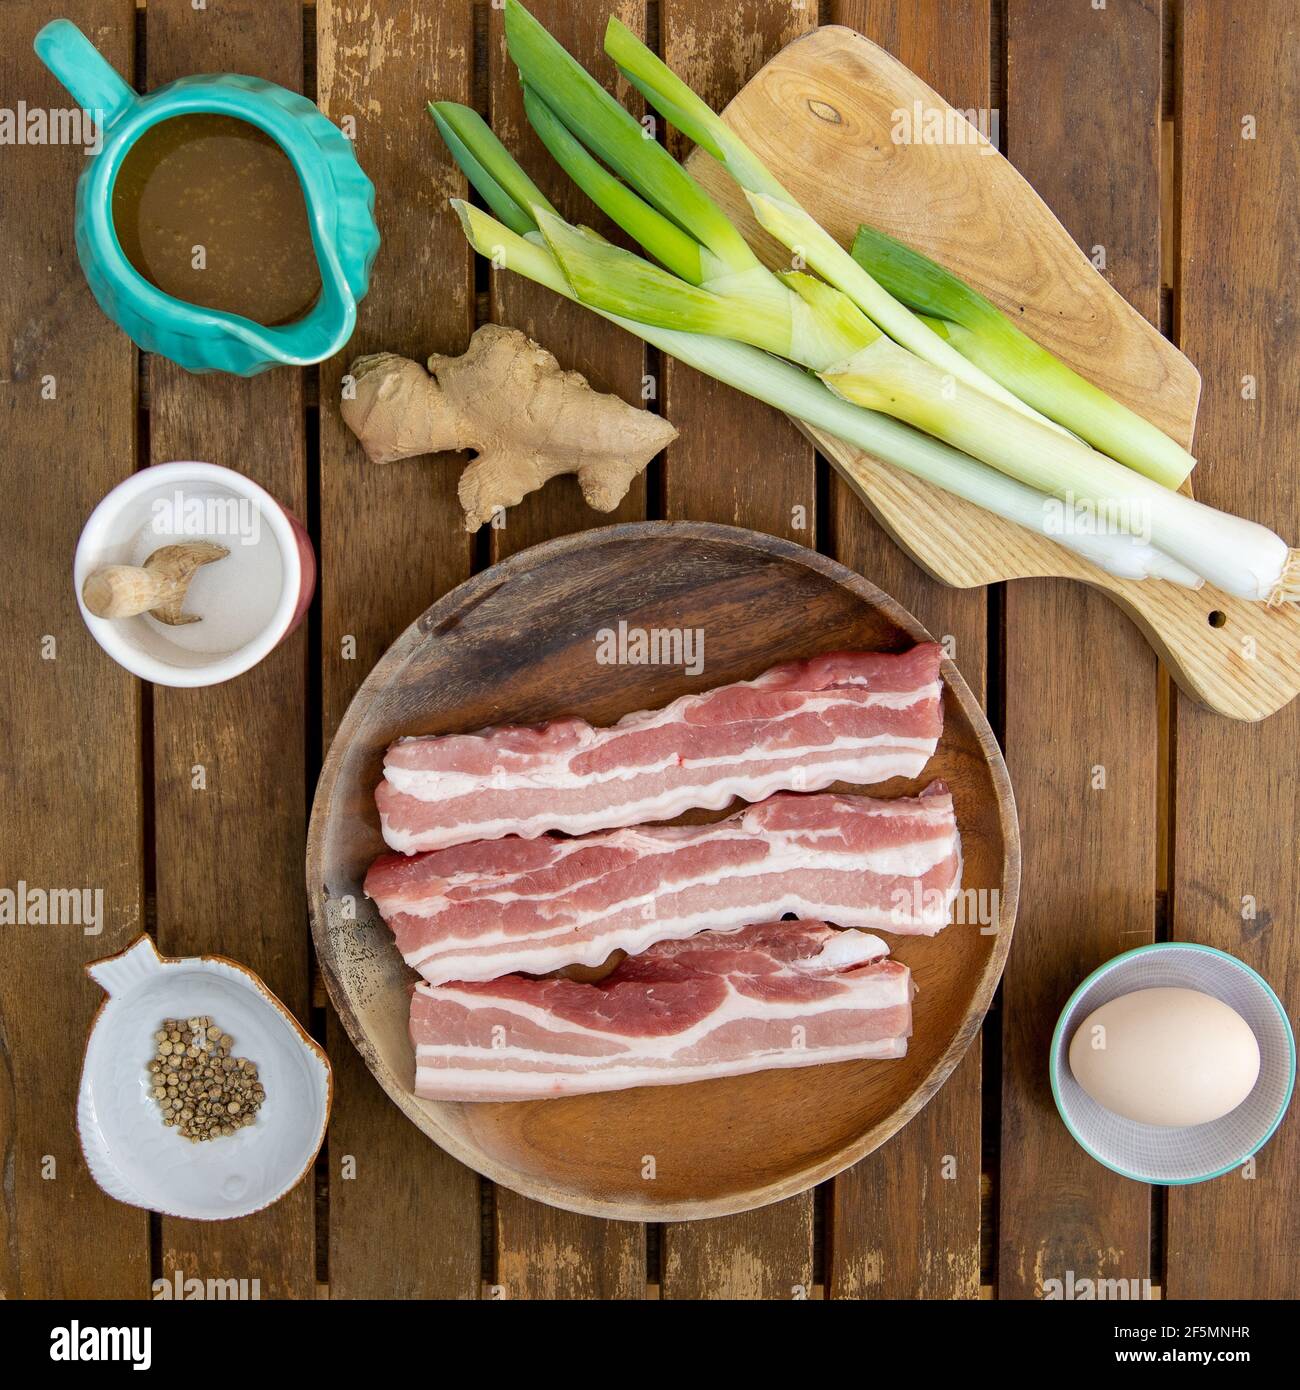 Wooden table with pork, spring onions, ginger, broth, salt, white pepper, an egg and 3  pieces of pork belly (ingredients for Chinese dumplings) Stock Photo